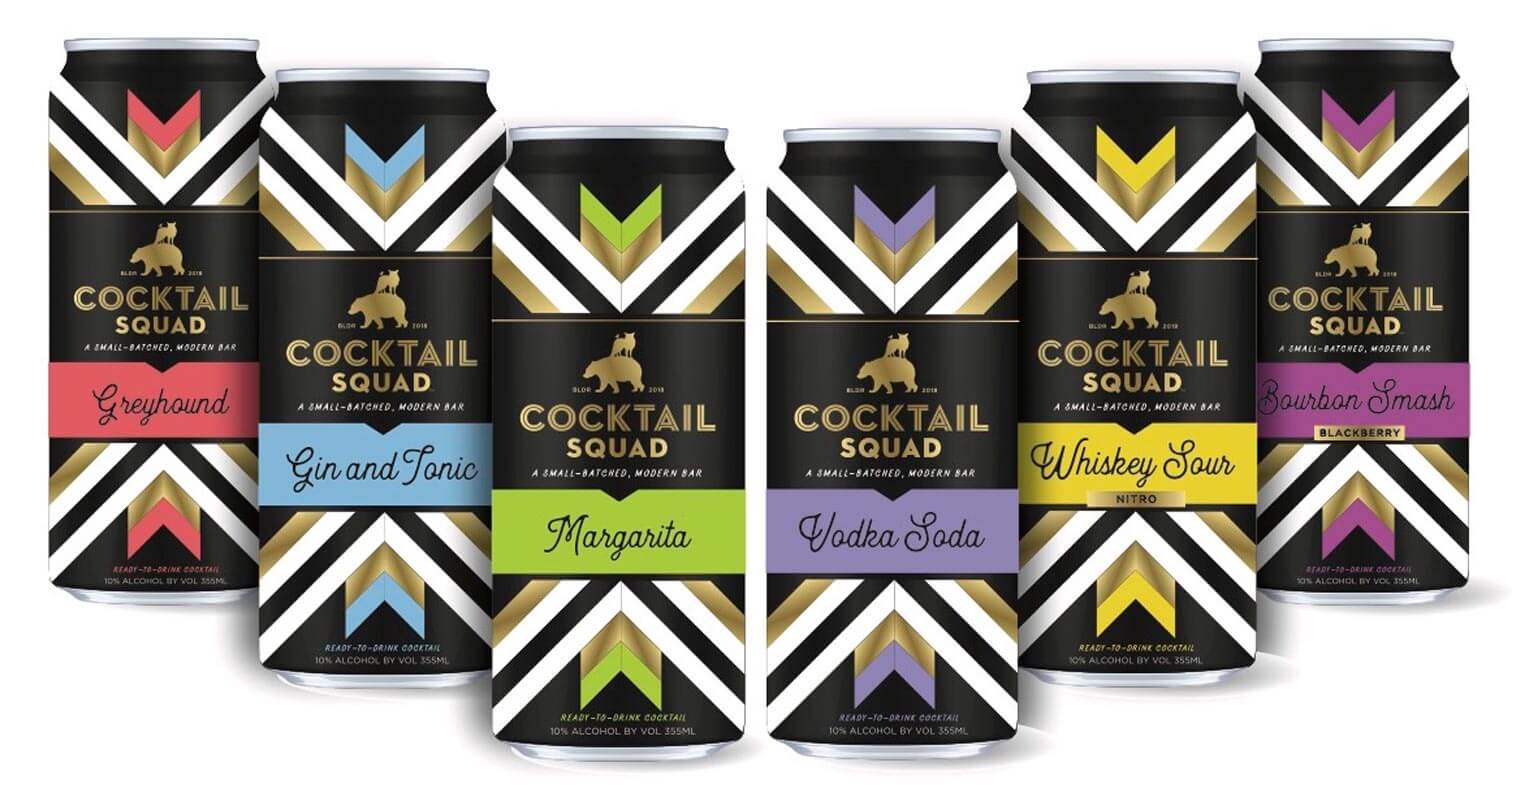 Cocktail Squad Ready-to-Drink Cocktails, canned flavor varieties, featured image